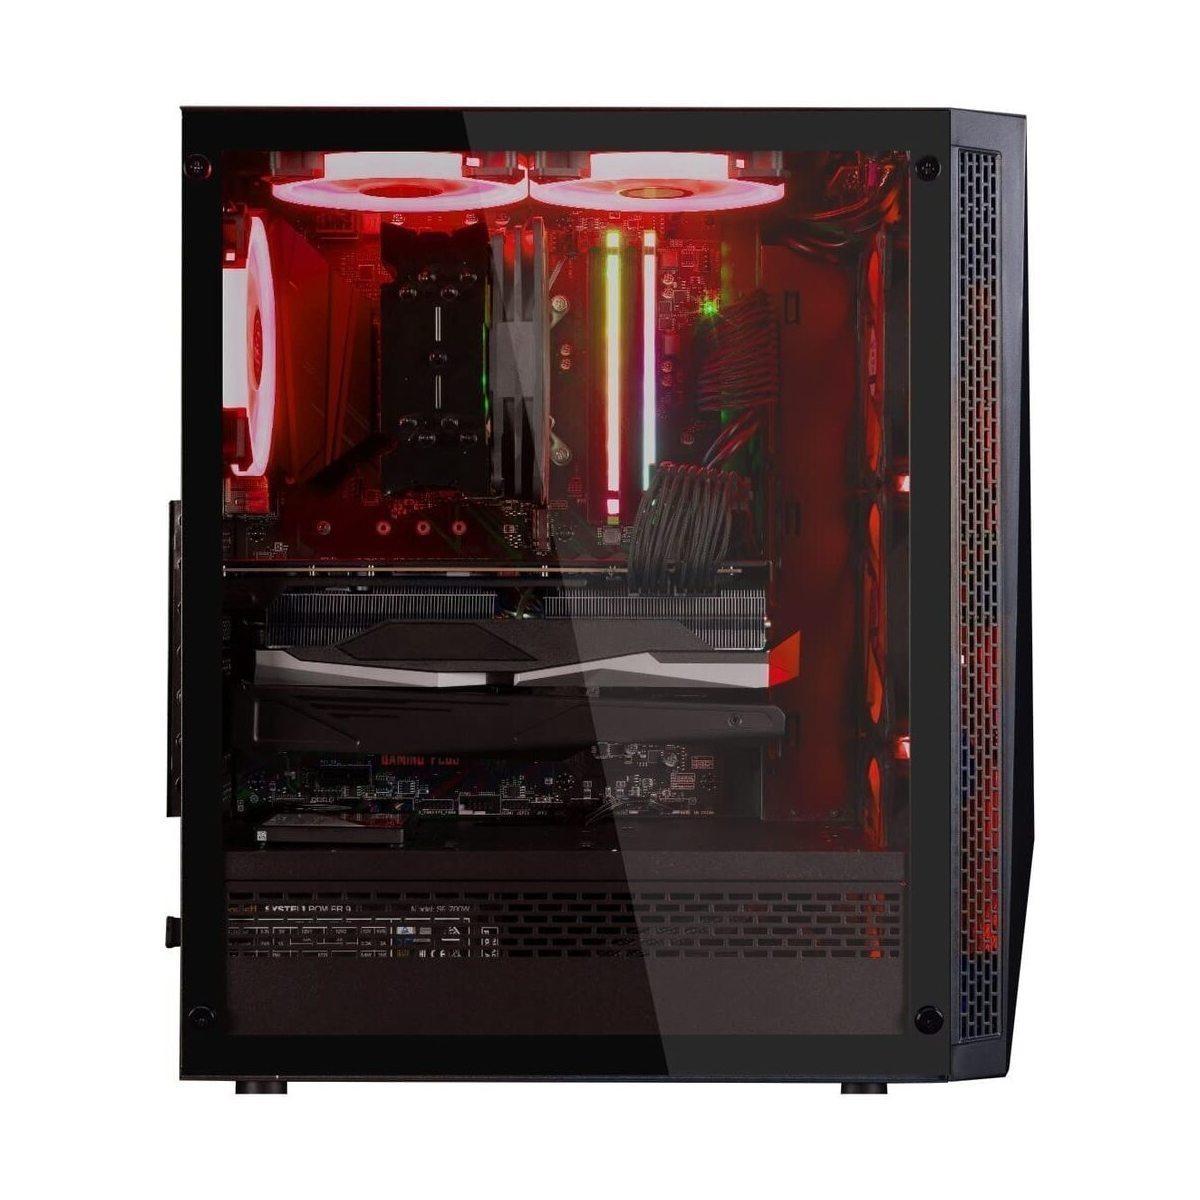 Gaming PC Ultra IN06 powered by ASUS - Core i7-12700KF - Radeon RX 6700 XT